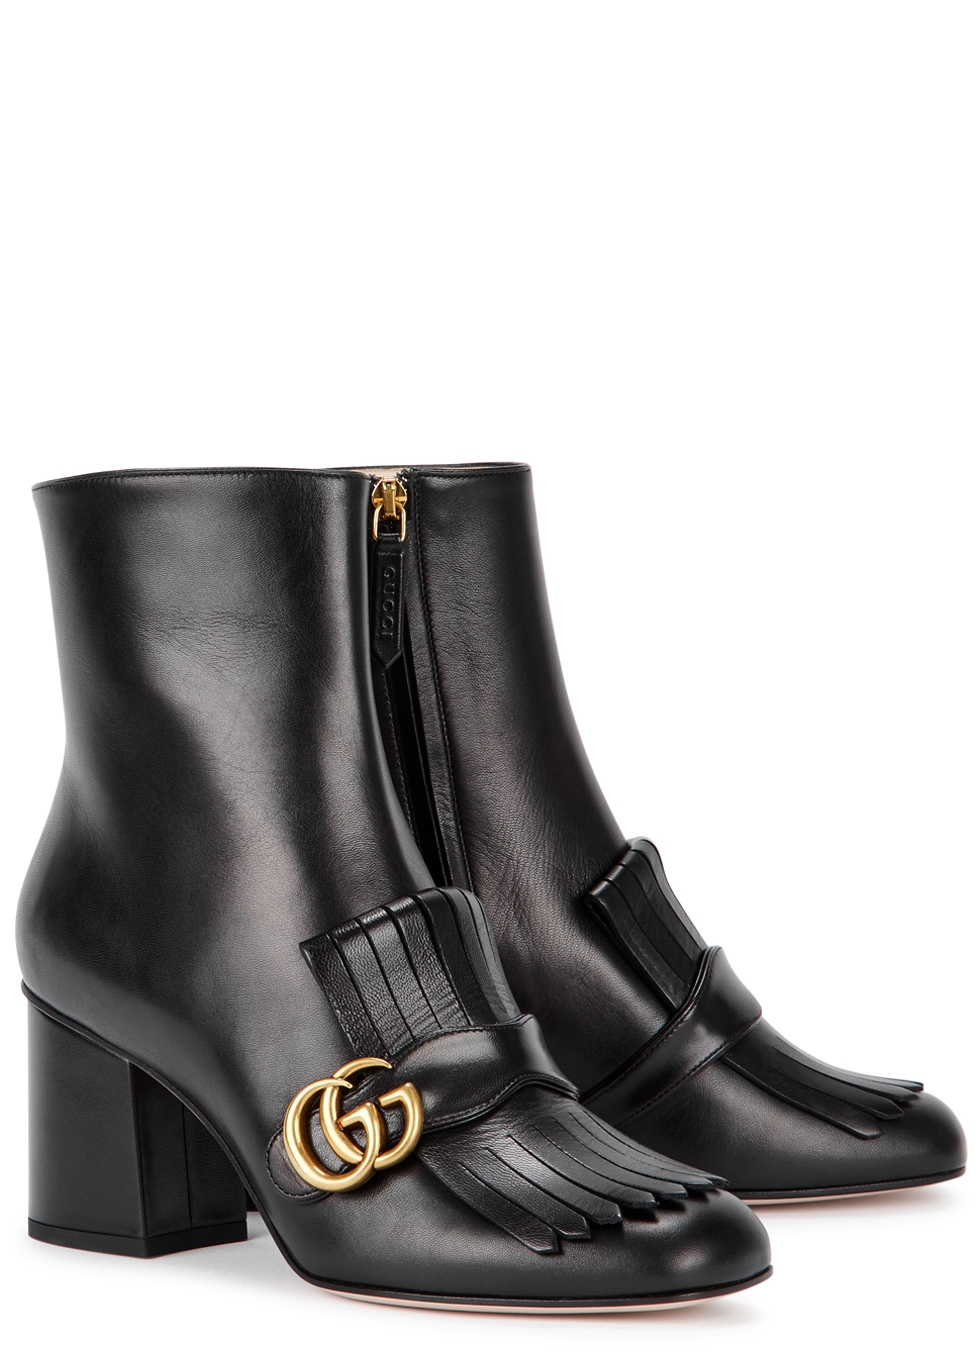 gucci black leather boots